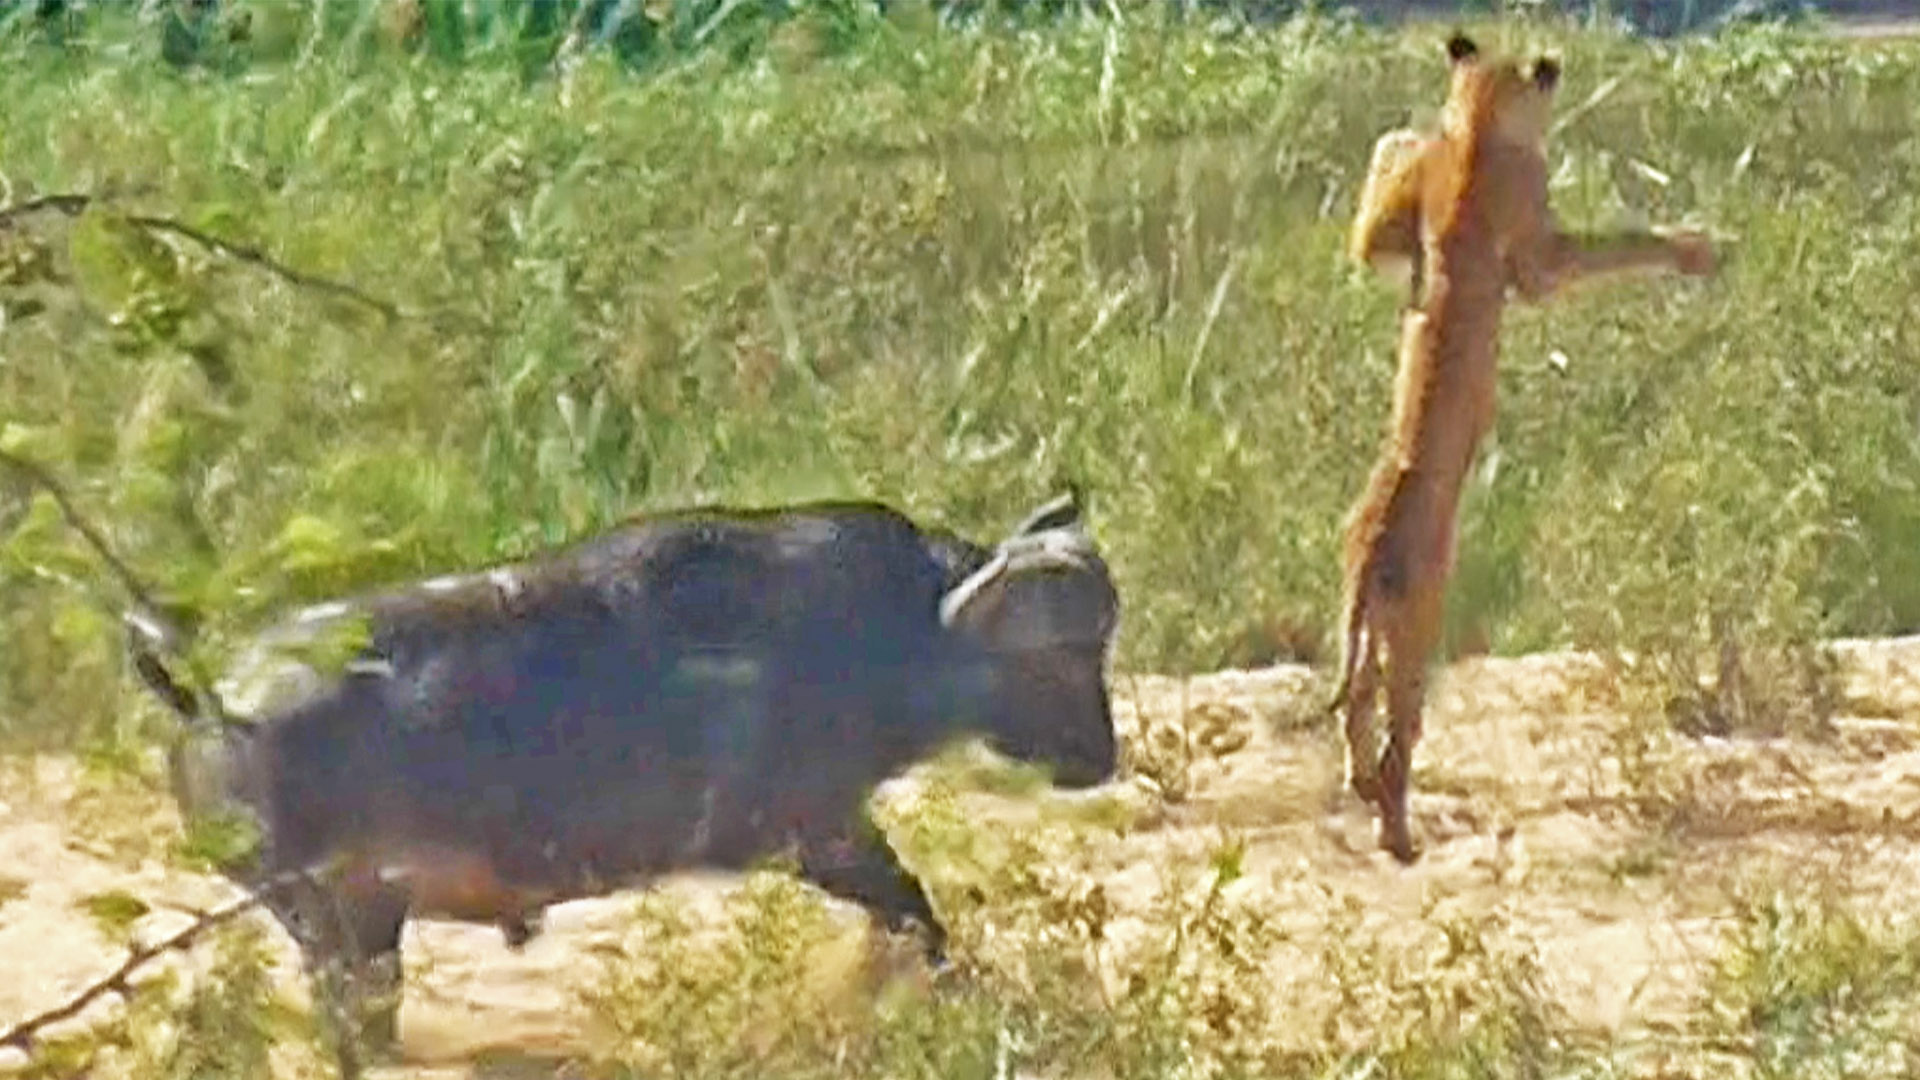 Buffalo Launches Lion into Air to Save Lizard